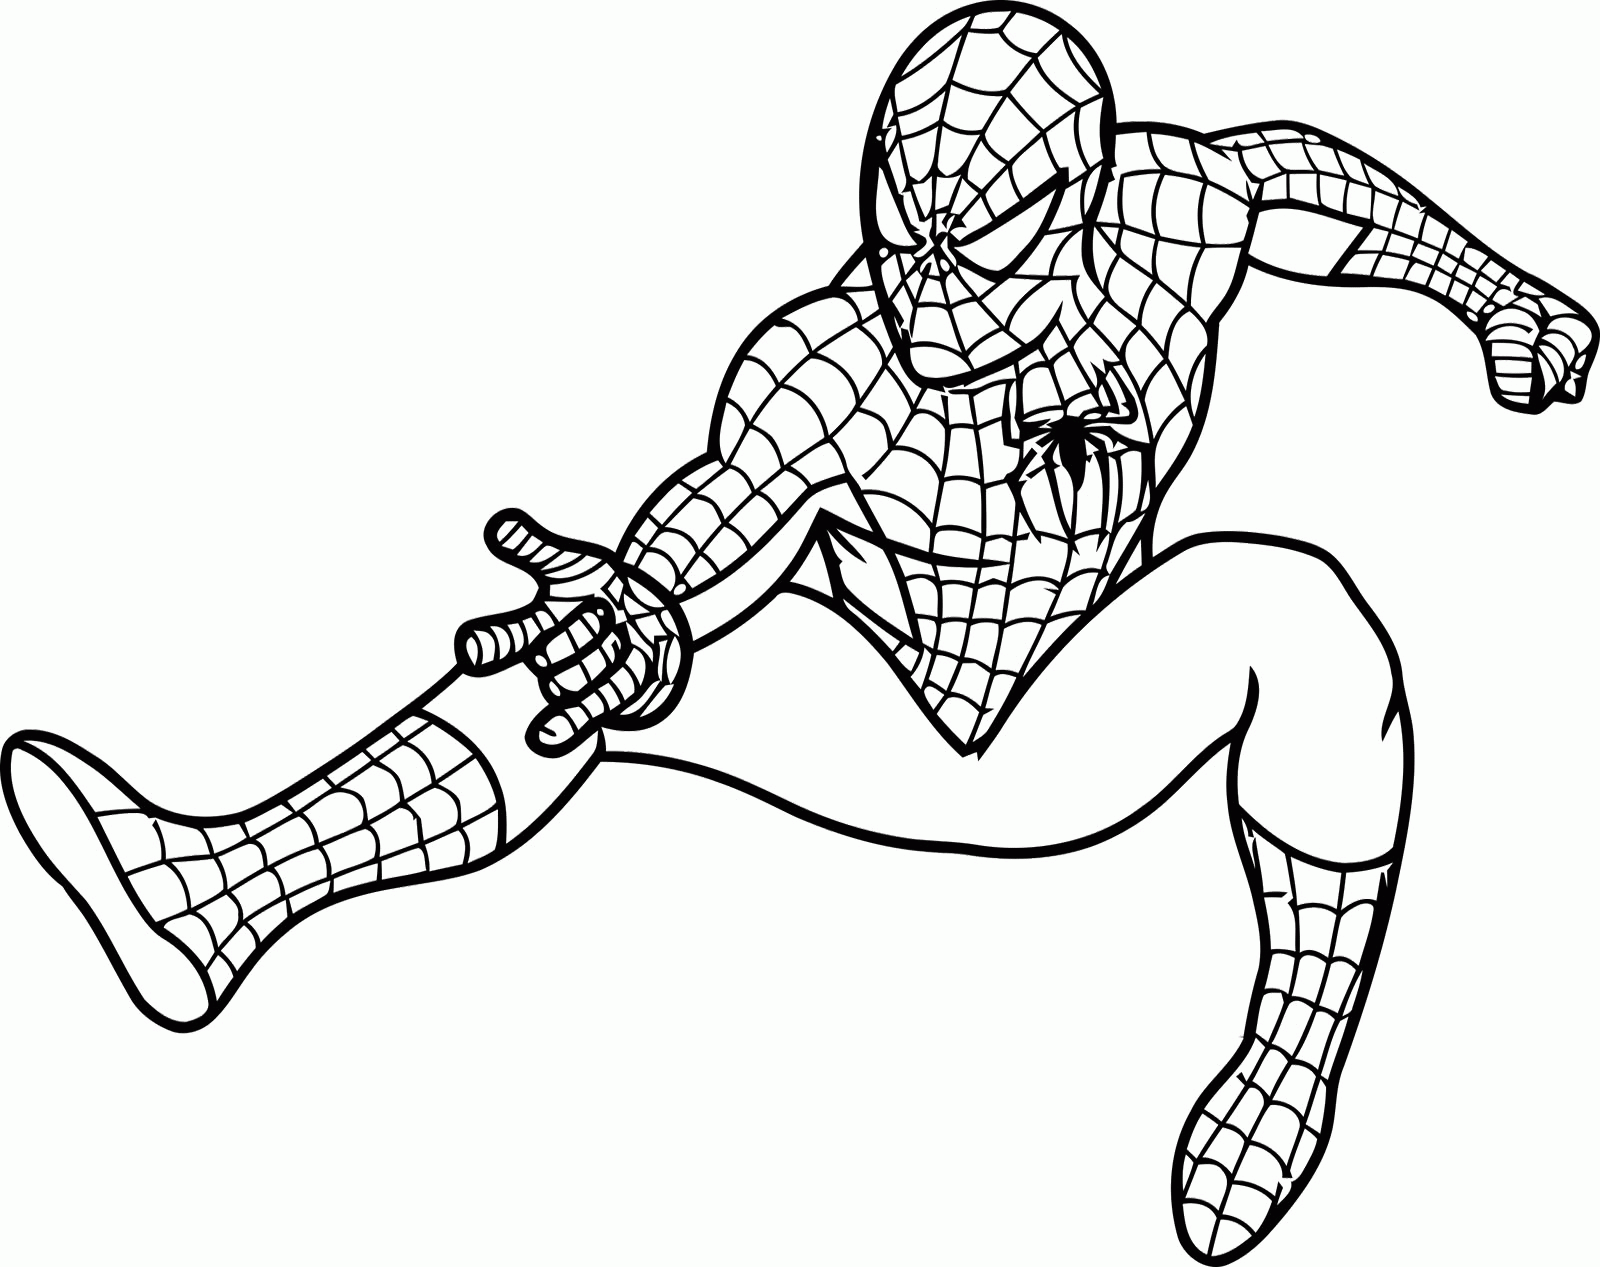 Spiderman Coloring Pages Free (19 Pictures) - Colorine.net | 8771